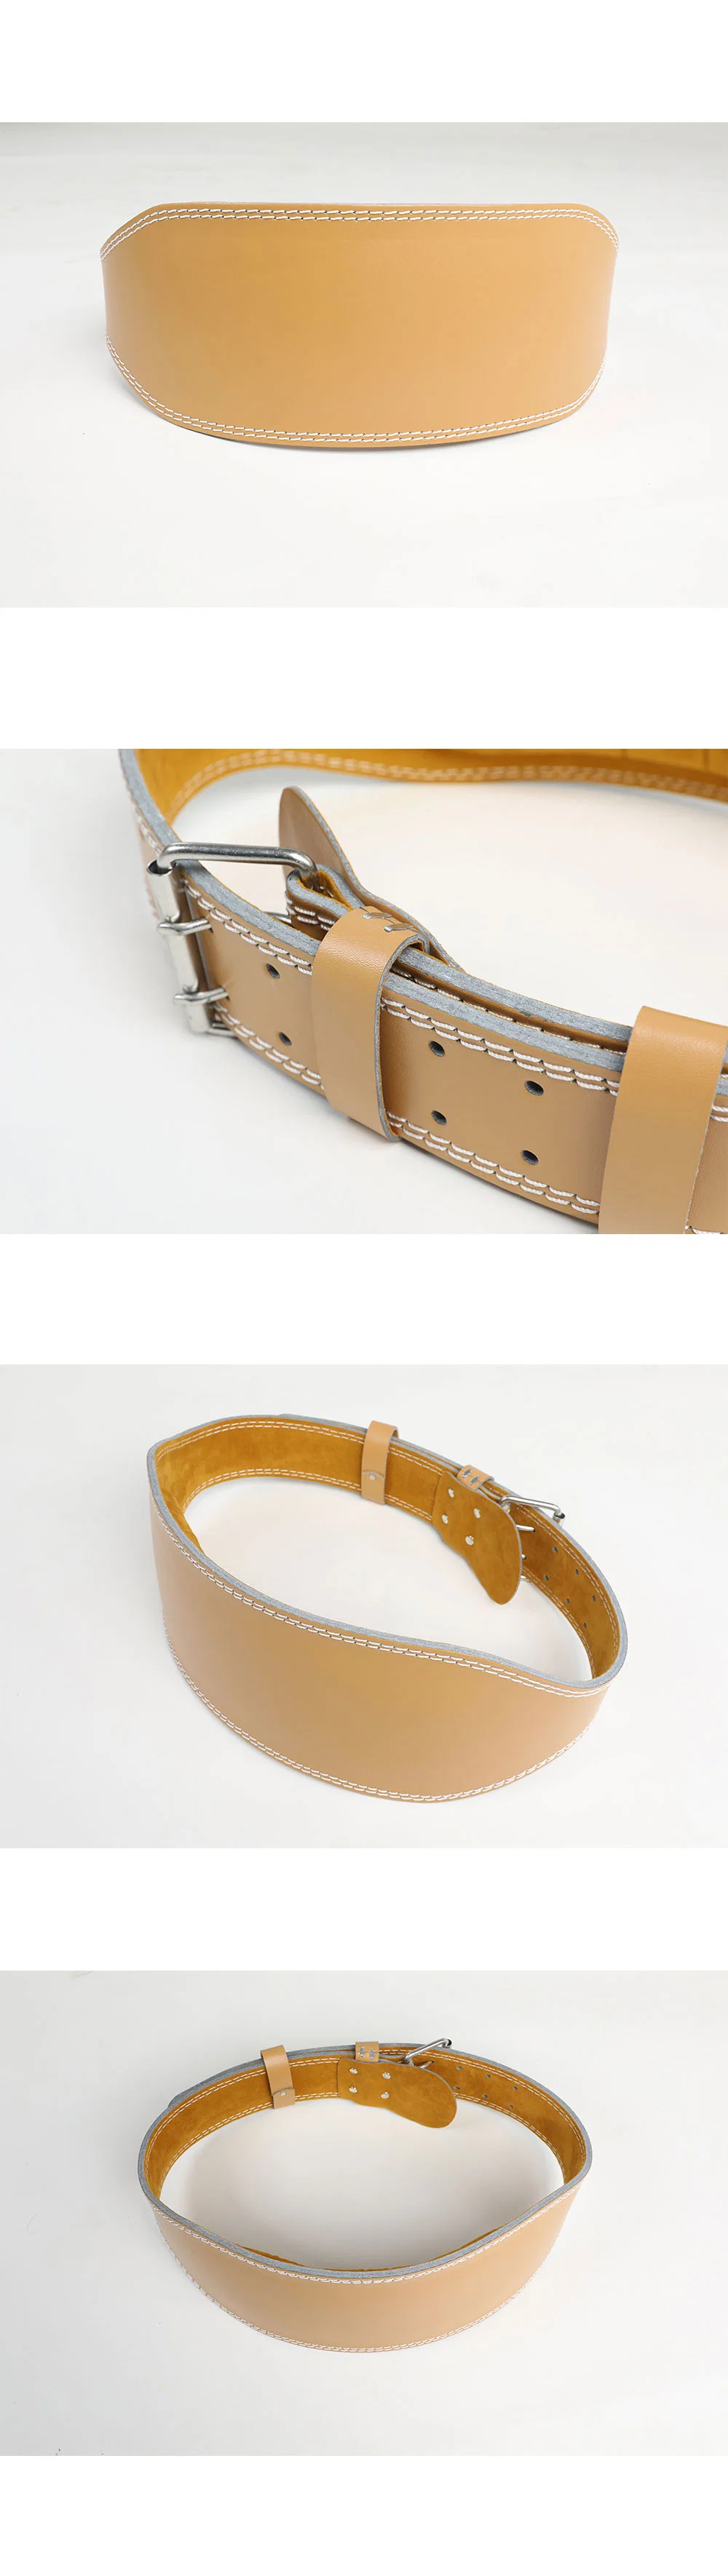 Leather Weight Lifting Belt for Weighting